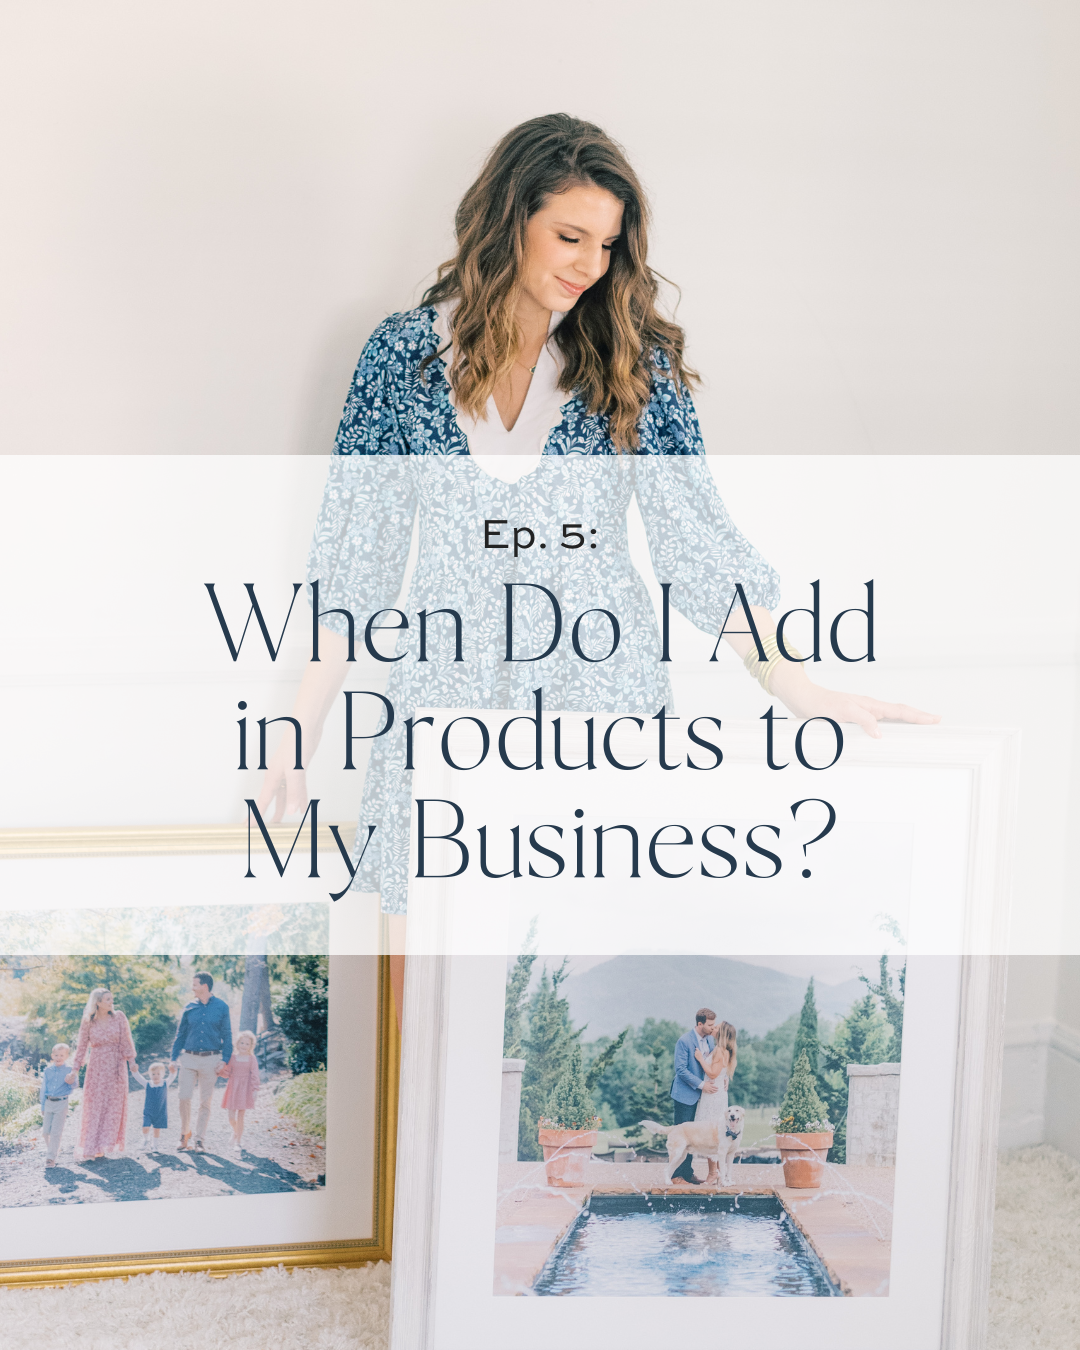 When Do I Add in Products to My Business?